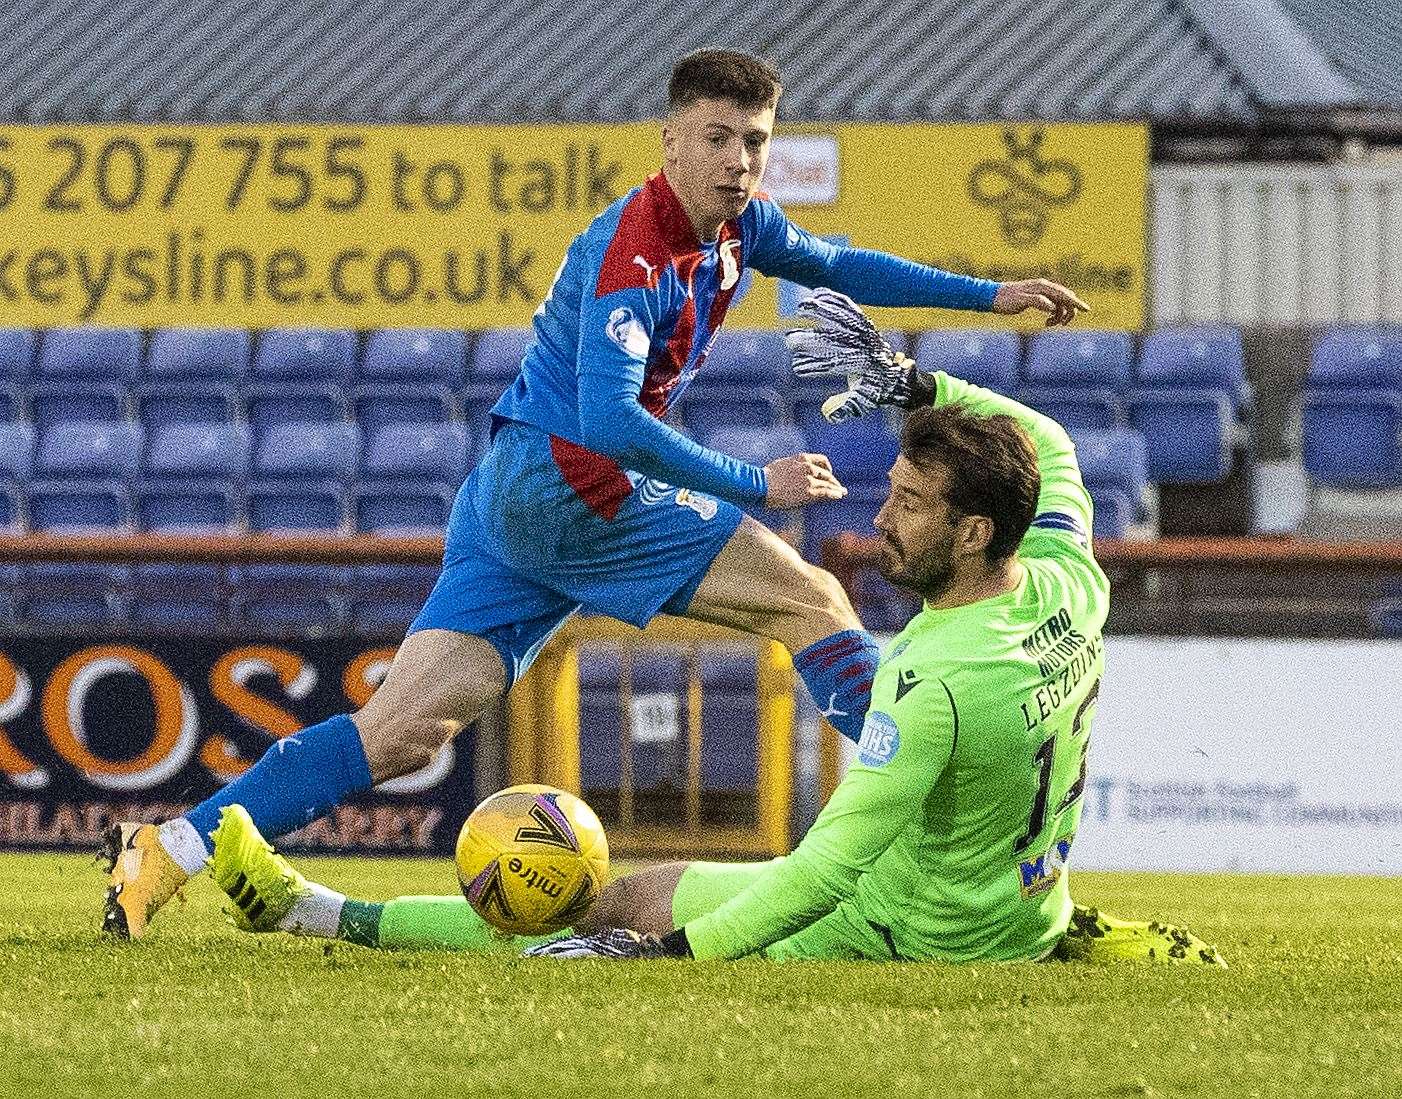 Picture - Ken Macpherson, Inverness. Inverness CT(1) v Dundee(1). 20.04.21. ICT’s Daniel Mackay scores the opening goal past Dundee 'keeper Adam Legzdins.